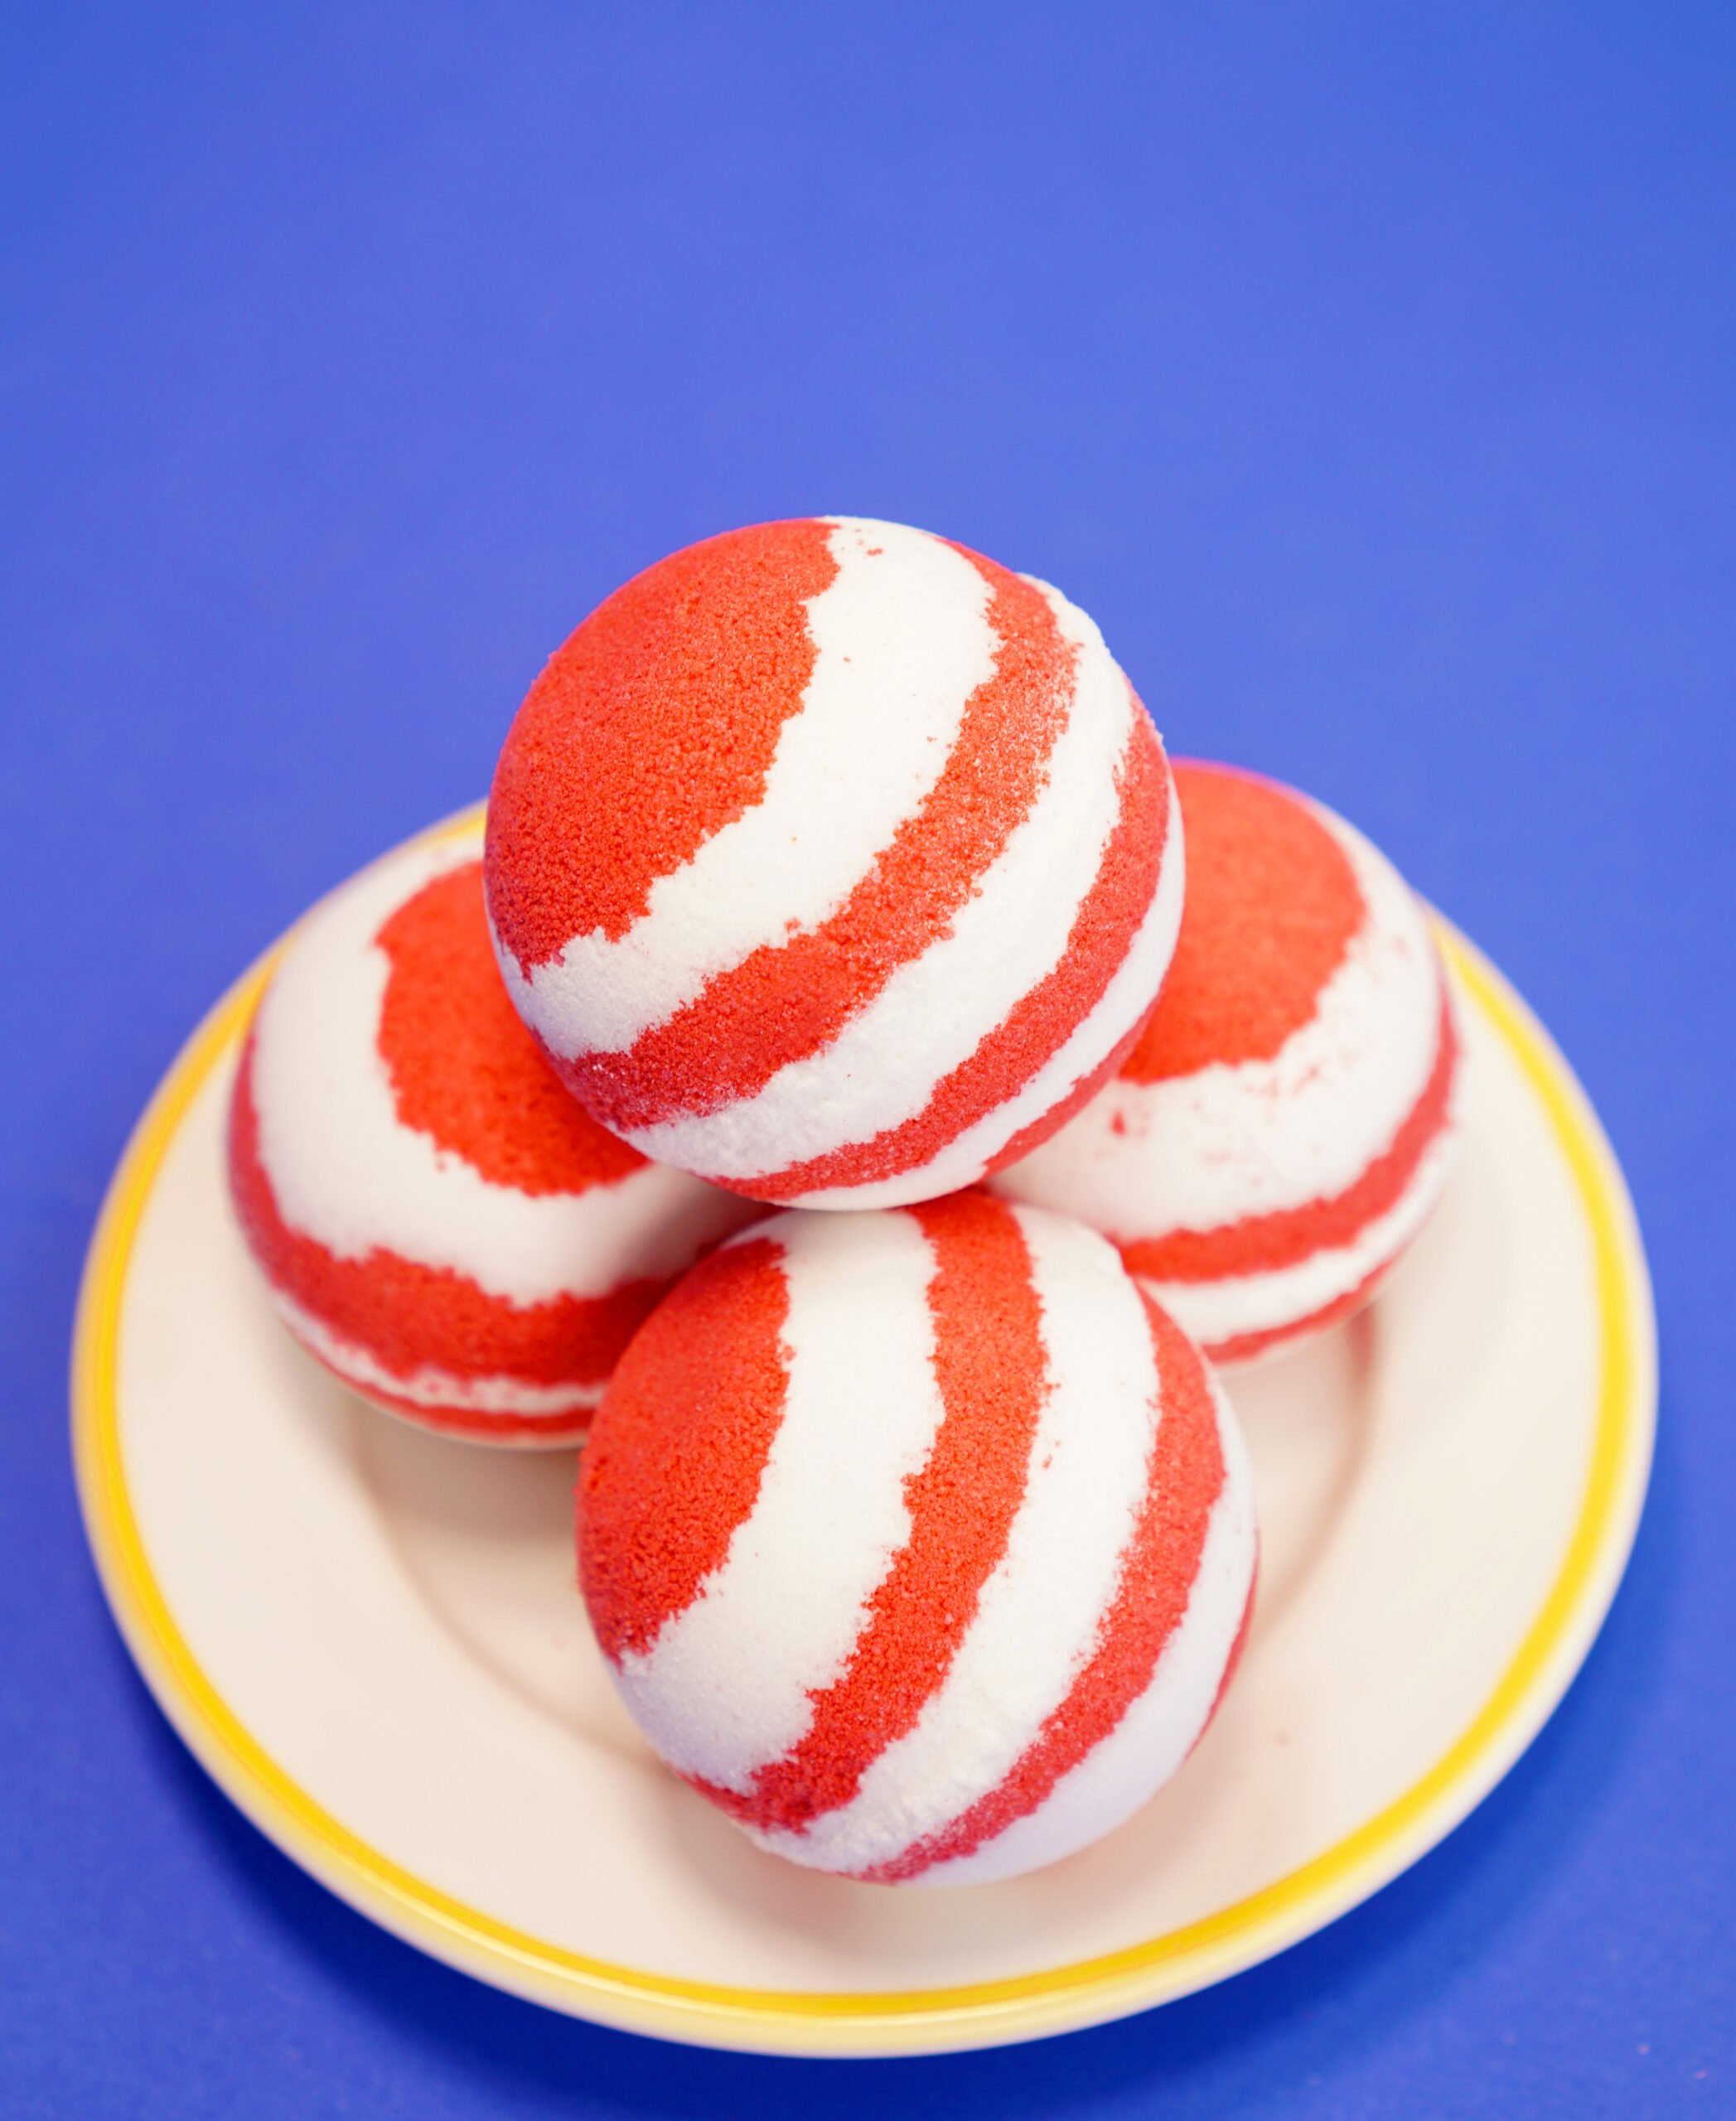 red and white striped bath bombs on white plate on blue background